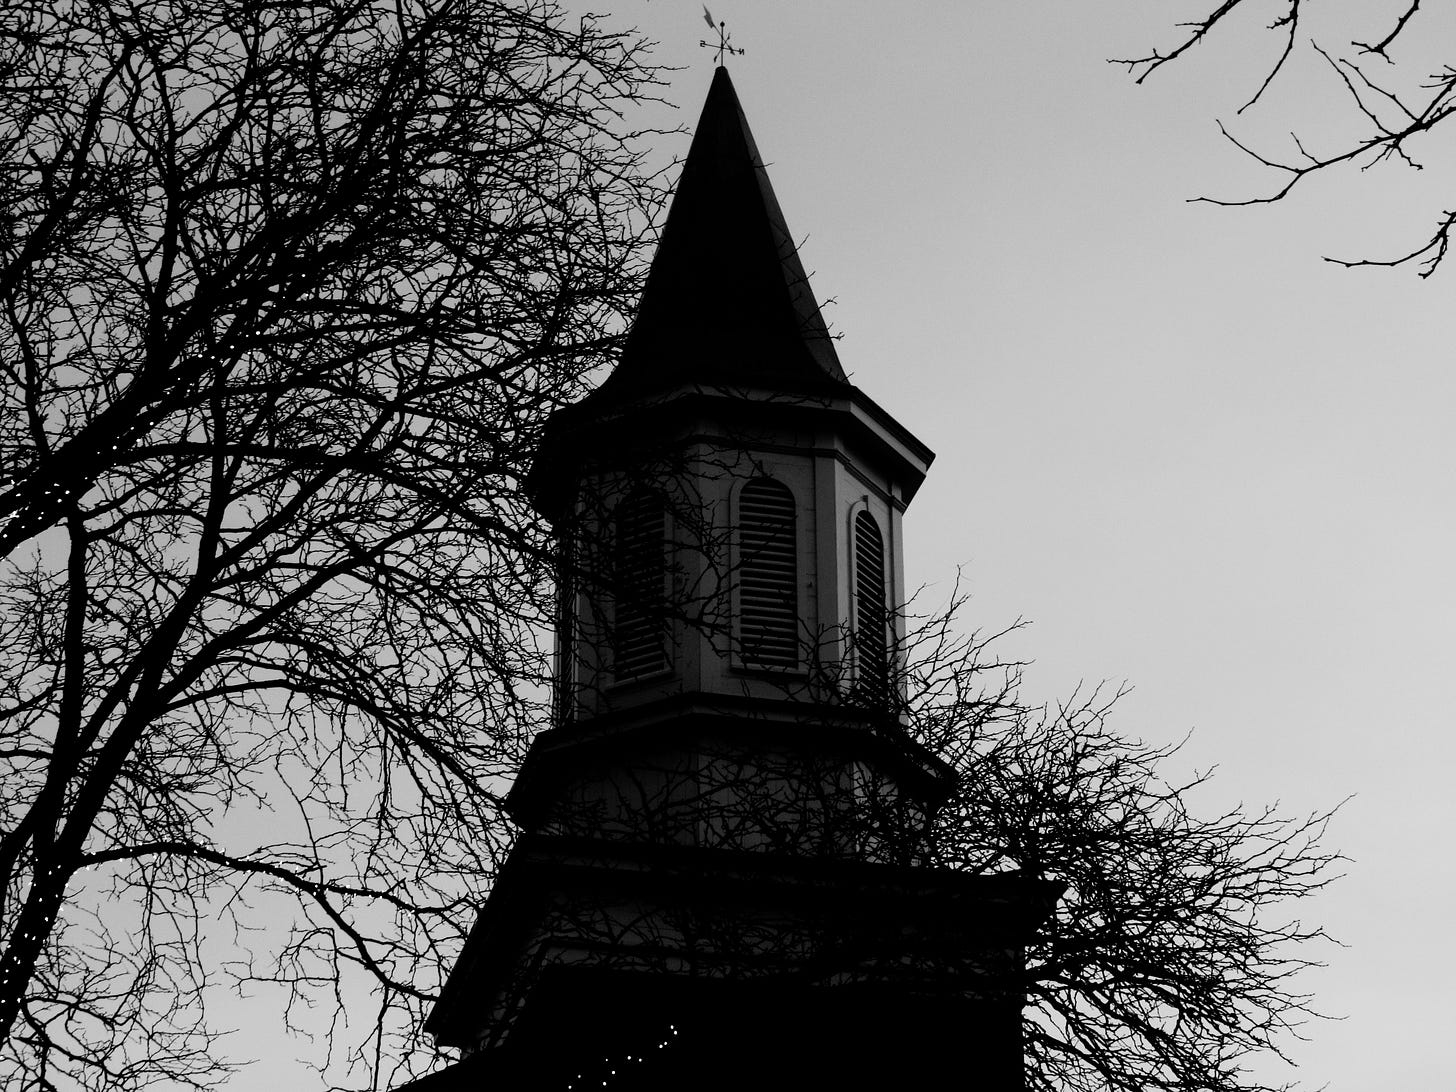 A black and white photo of a church's steeple with a weather vane on the pea and a leafless tree next to it